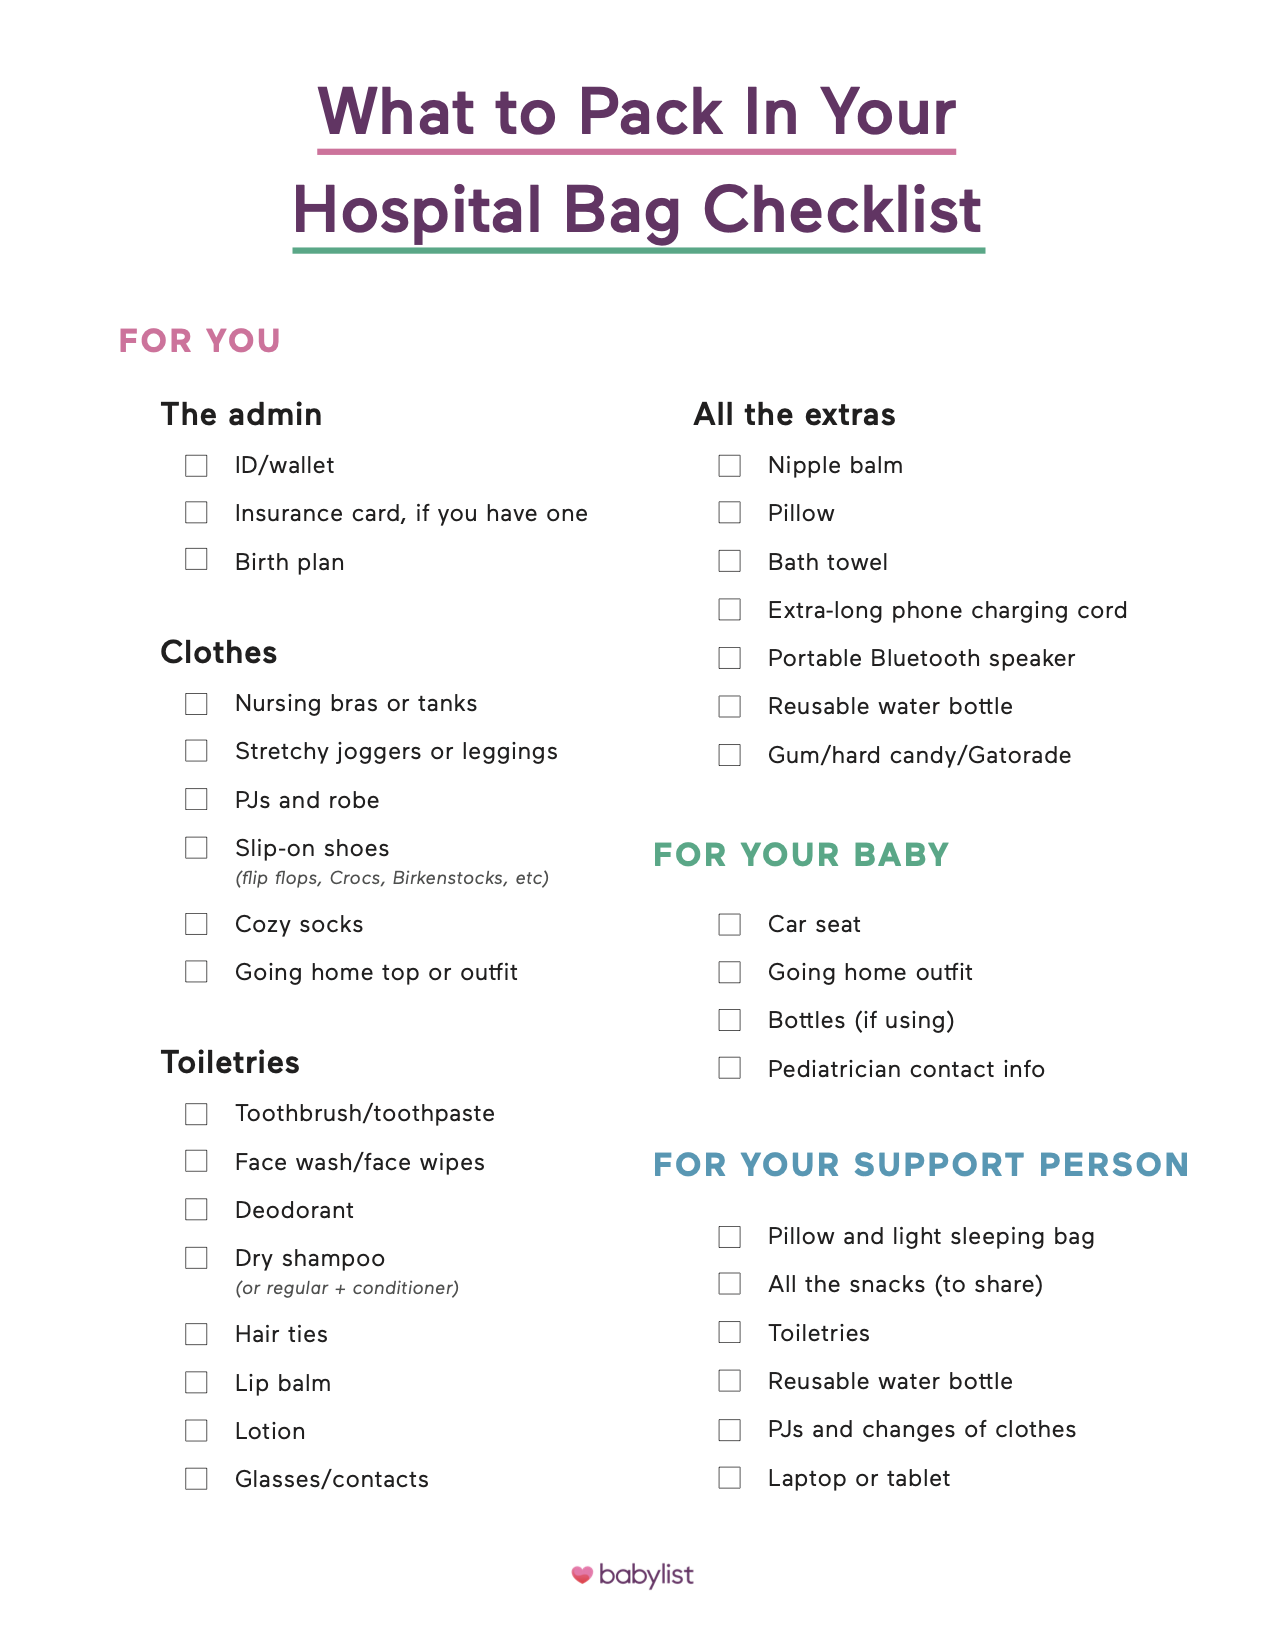 An image of a What to pack in your hospital bag checklist